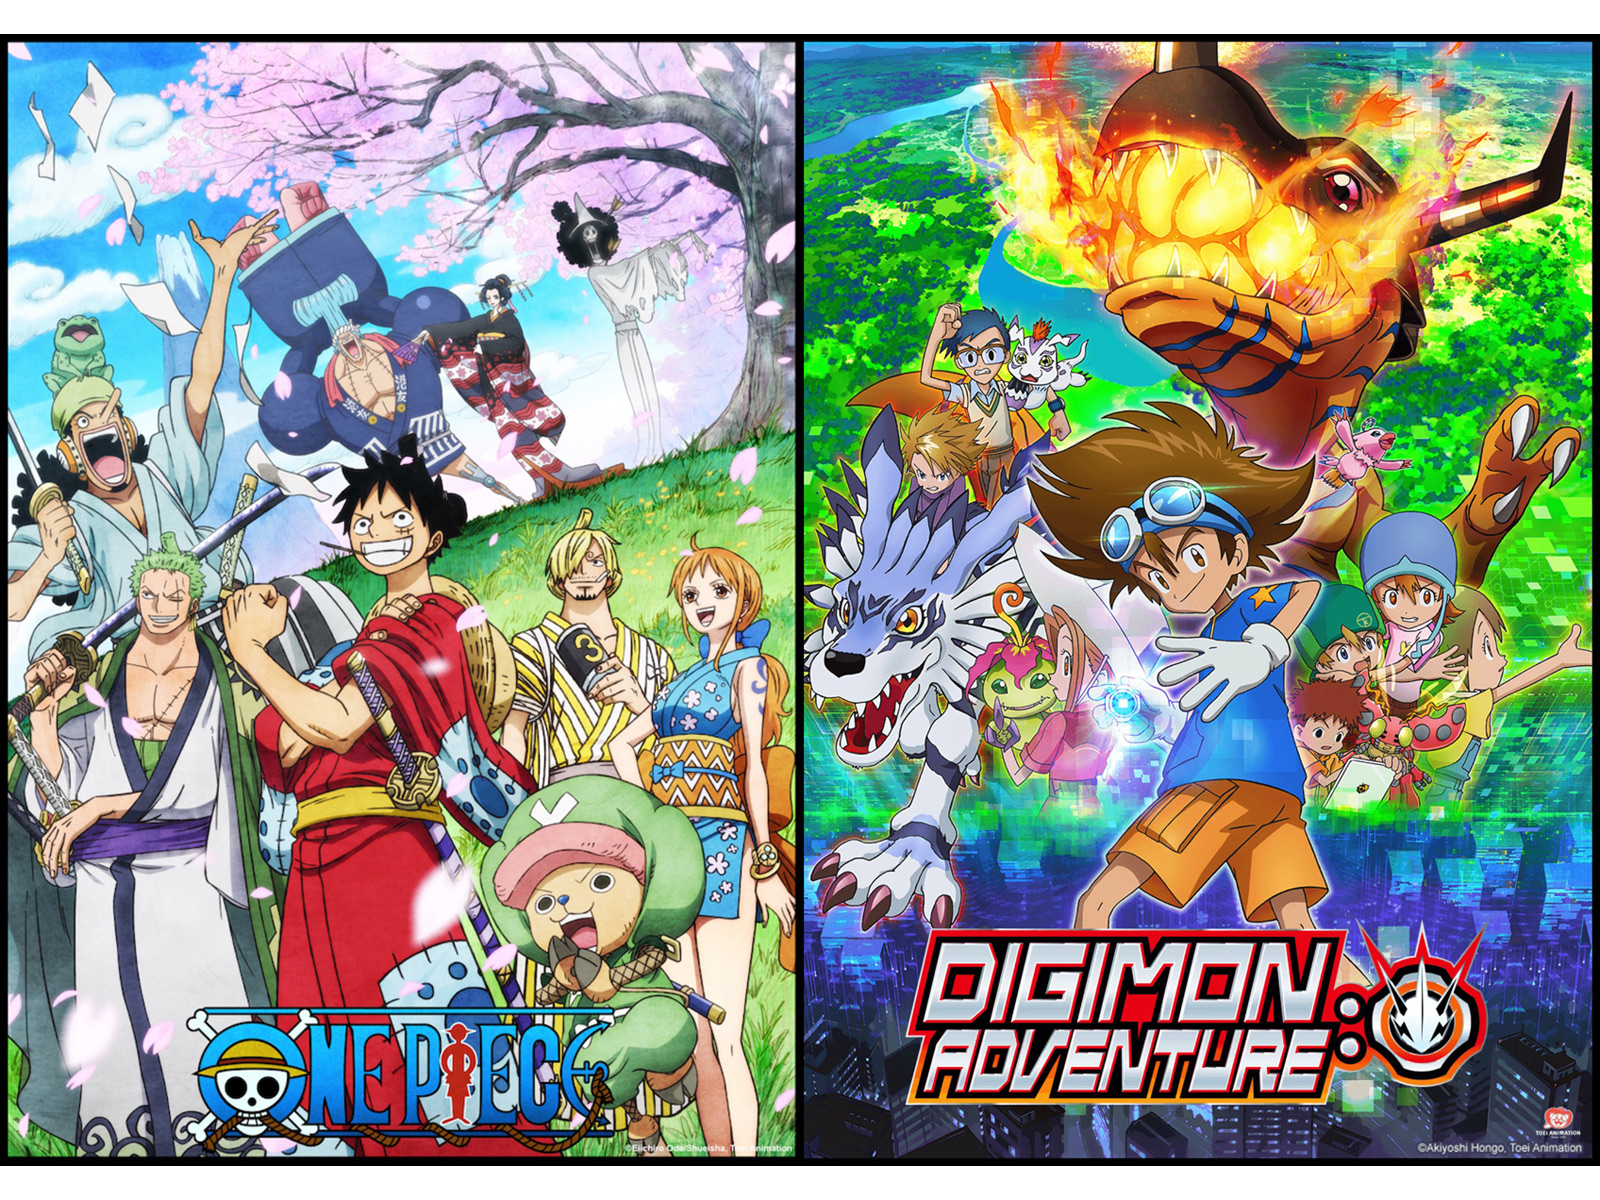 NEW EPISODES OF “ONE PIECE” & “DIGIMON ADVENTURE:” SUSPENDED DUE TO COVID-19